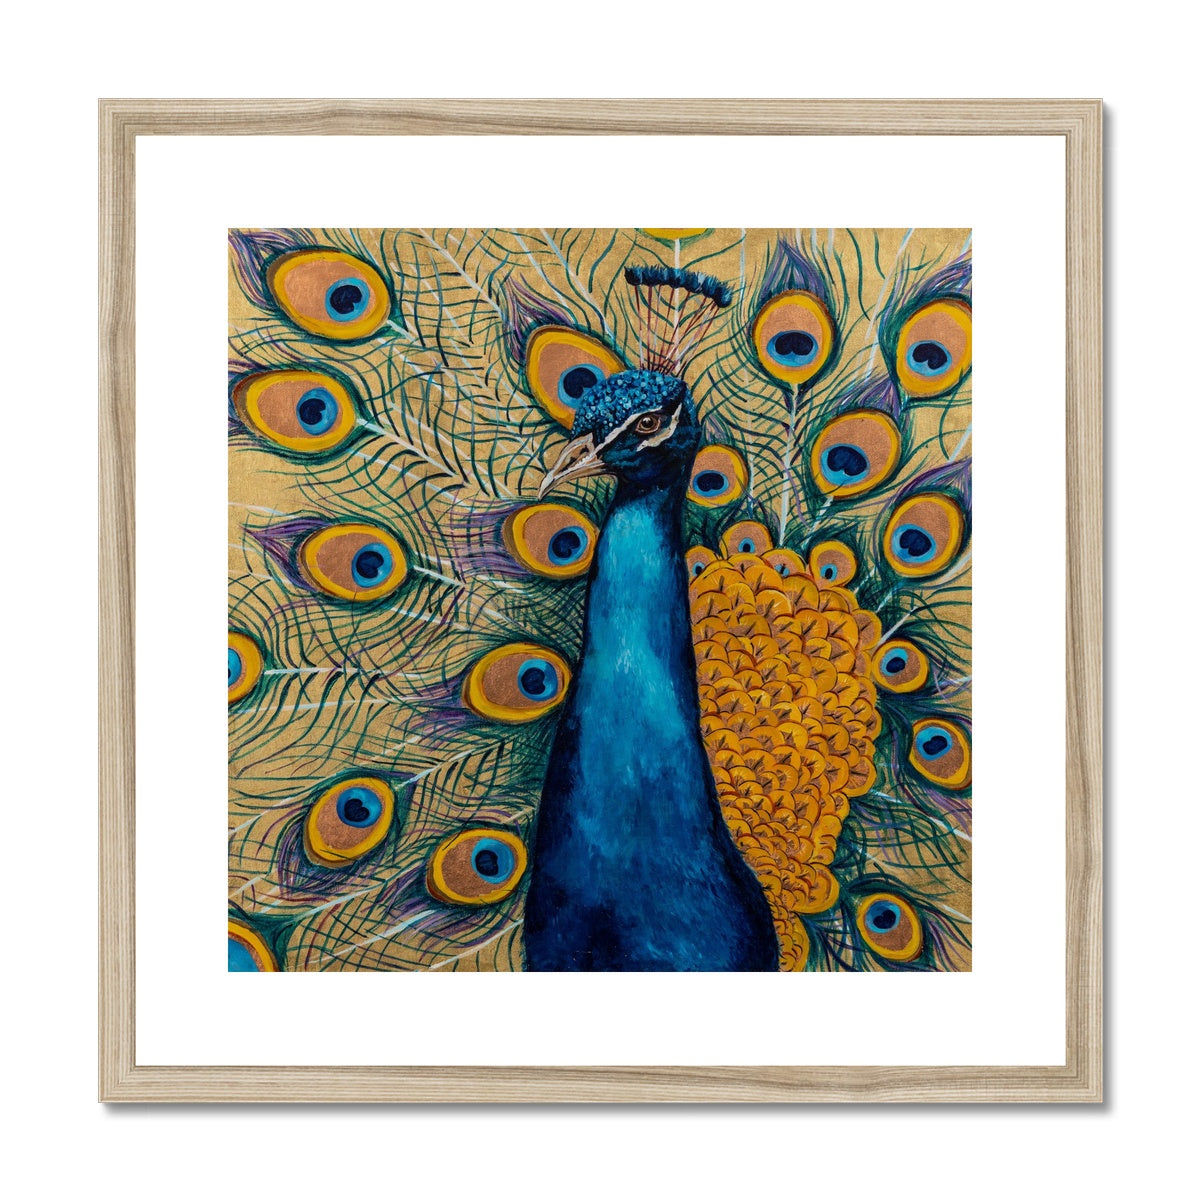 Pierre the Peacock Framed & Mounted Print